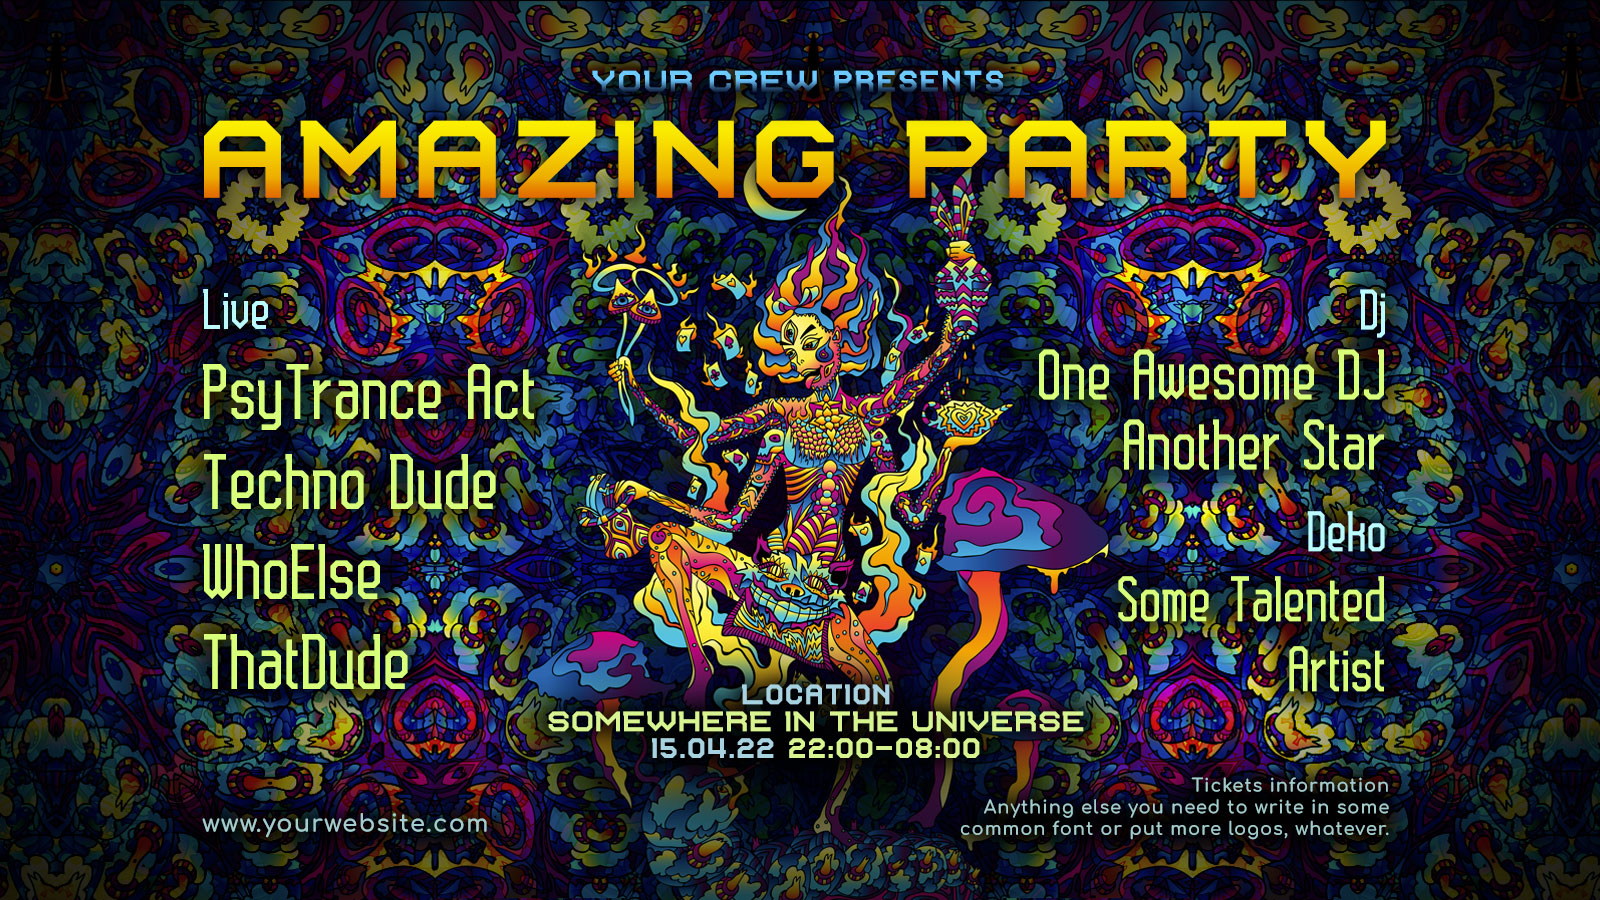 Kali in Acidland - Free Psychedelic Trance Party Facebook Promotion Cover